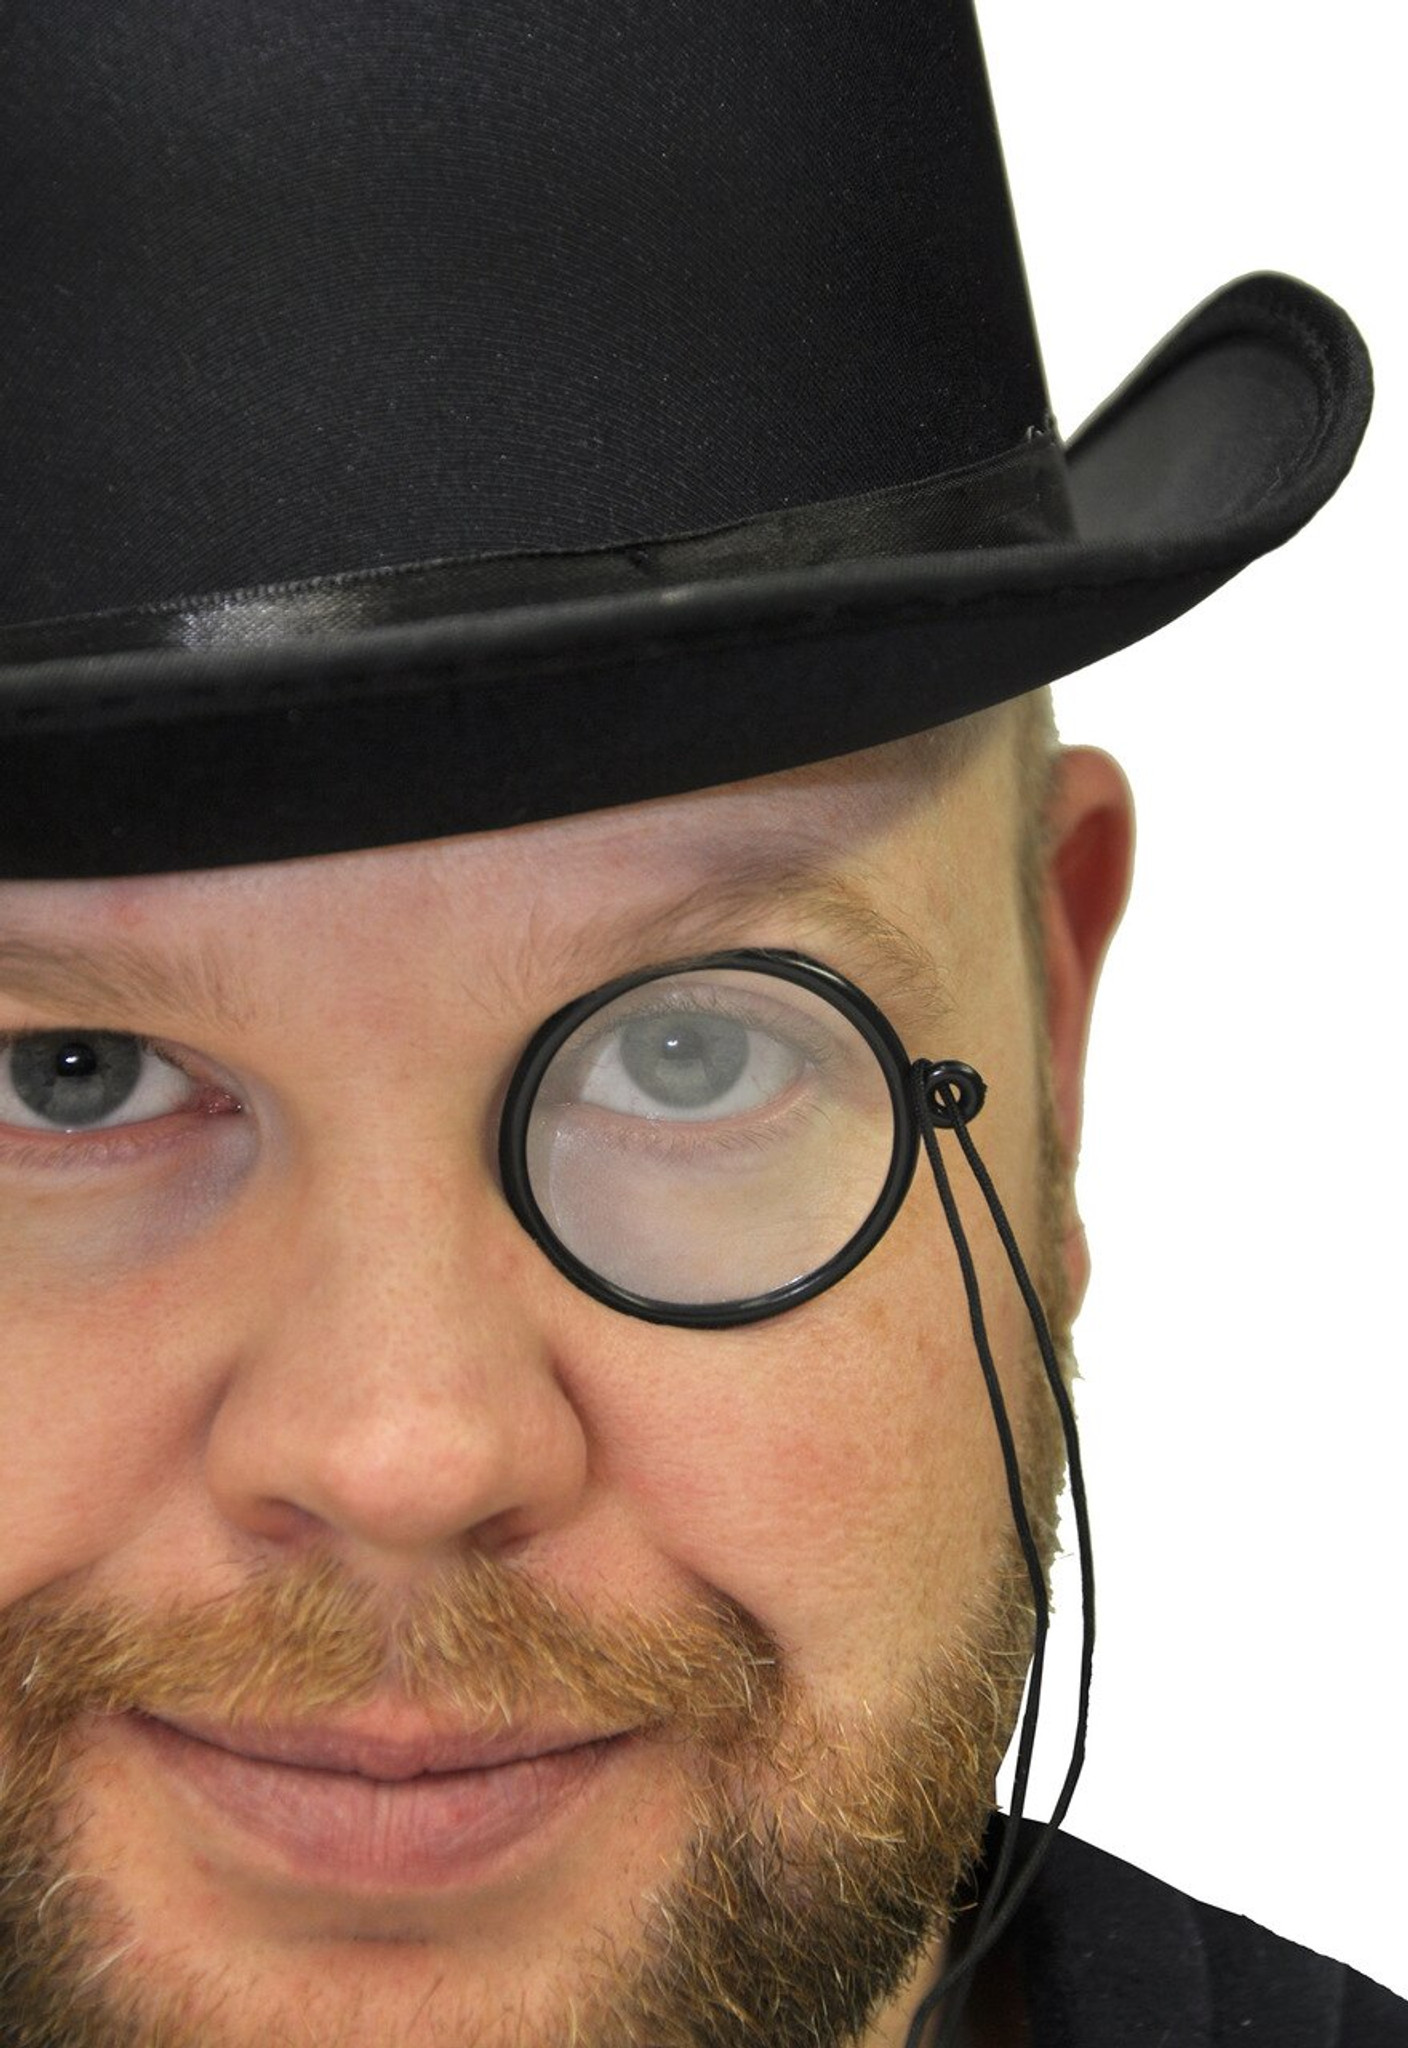 Why Wear a Monocle Instead of Glasses